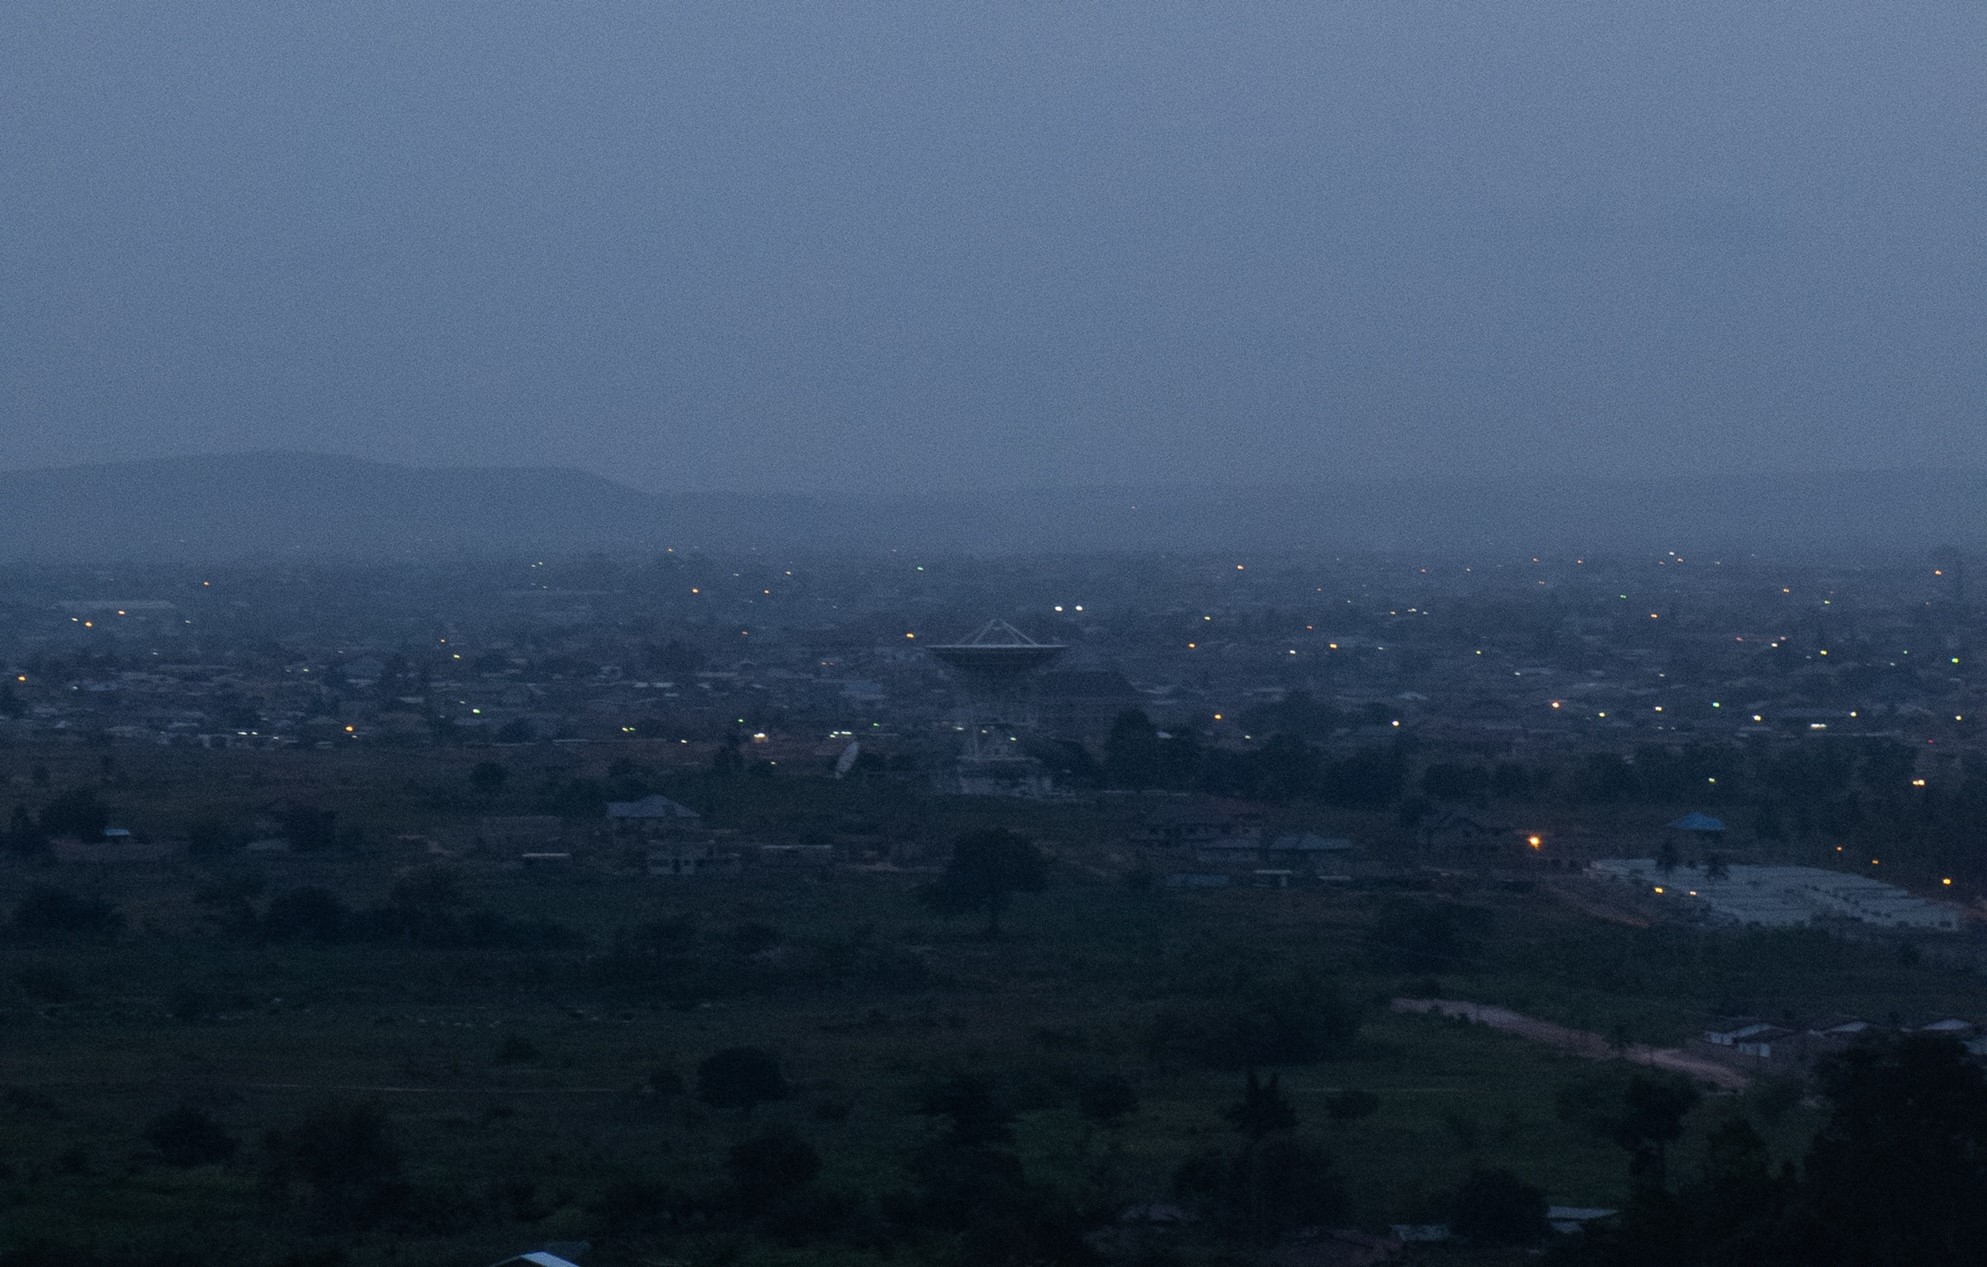 The Ghana Radio Astronomy Observatory from a distance at night, photograph by James Merron 2019